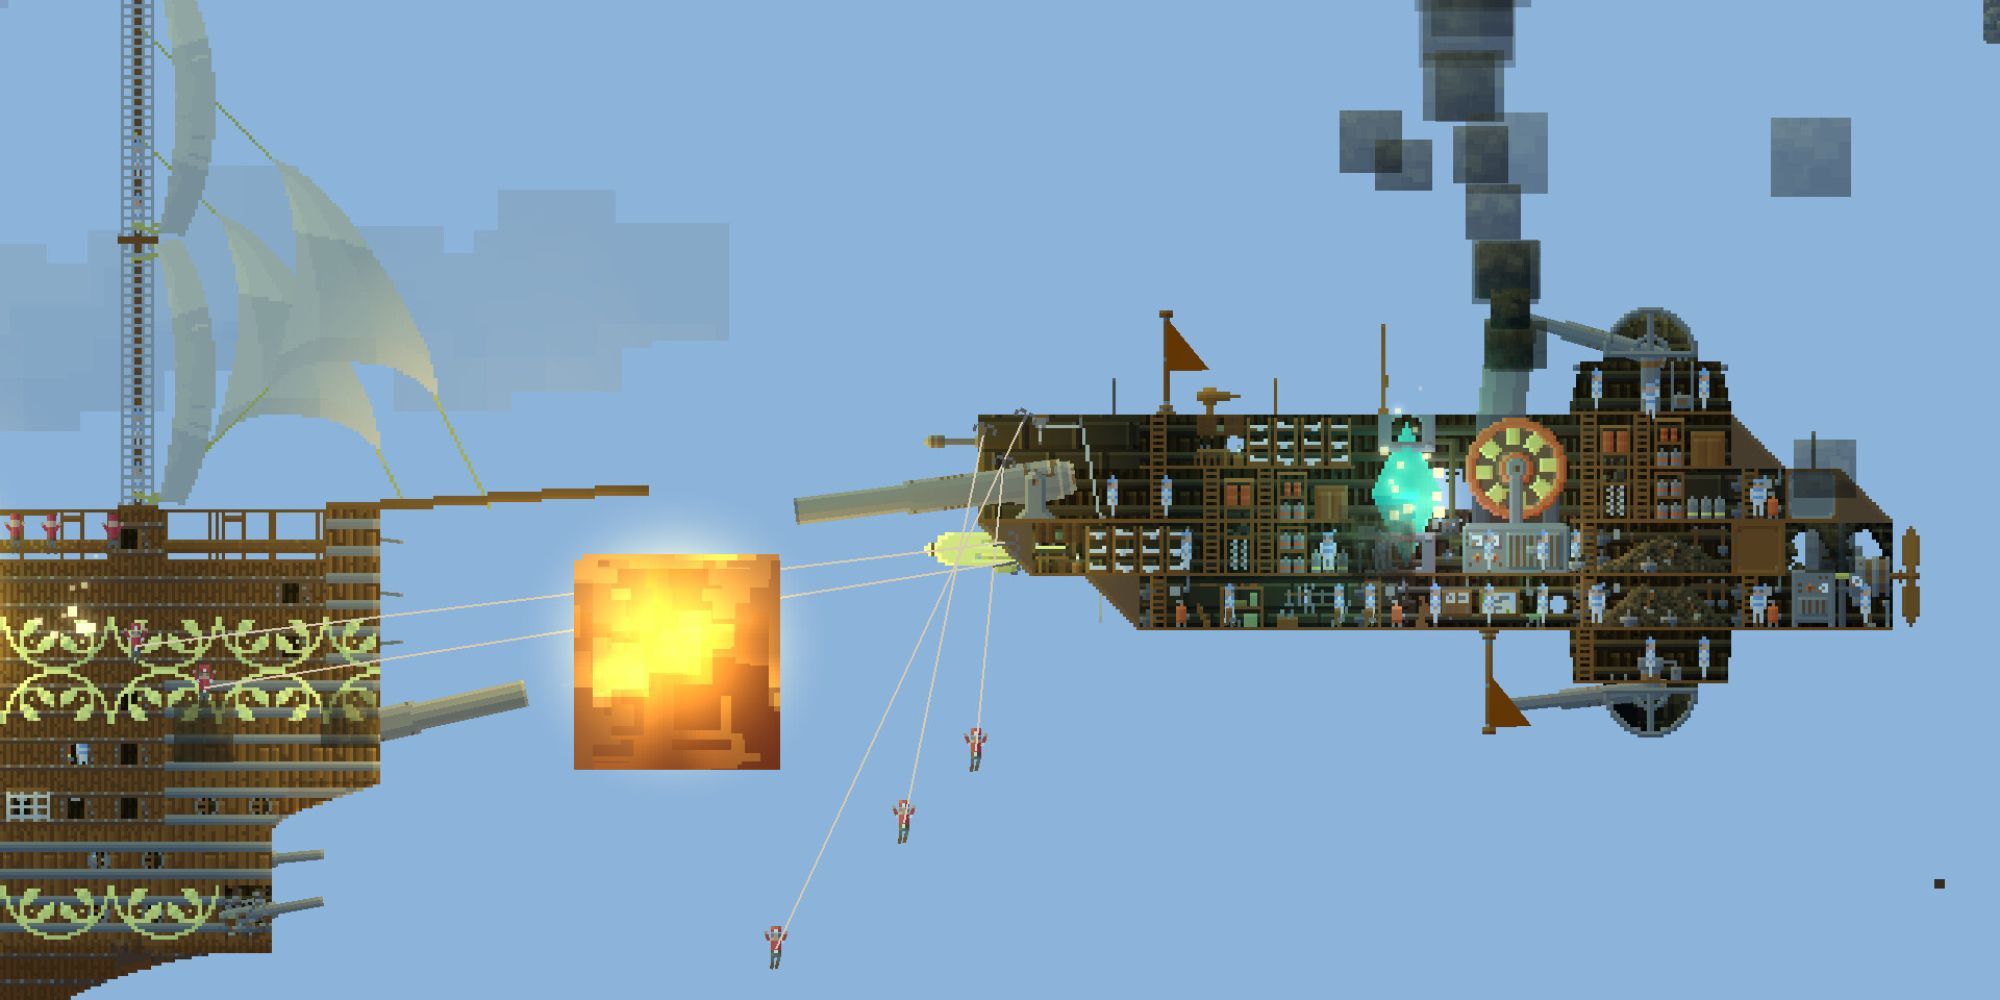 Two airships fighting in Airships: Conquer the Skies